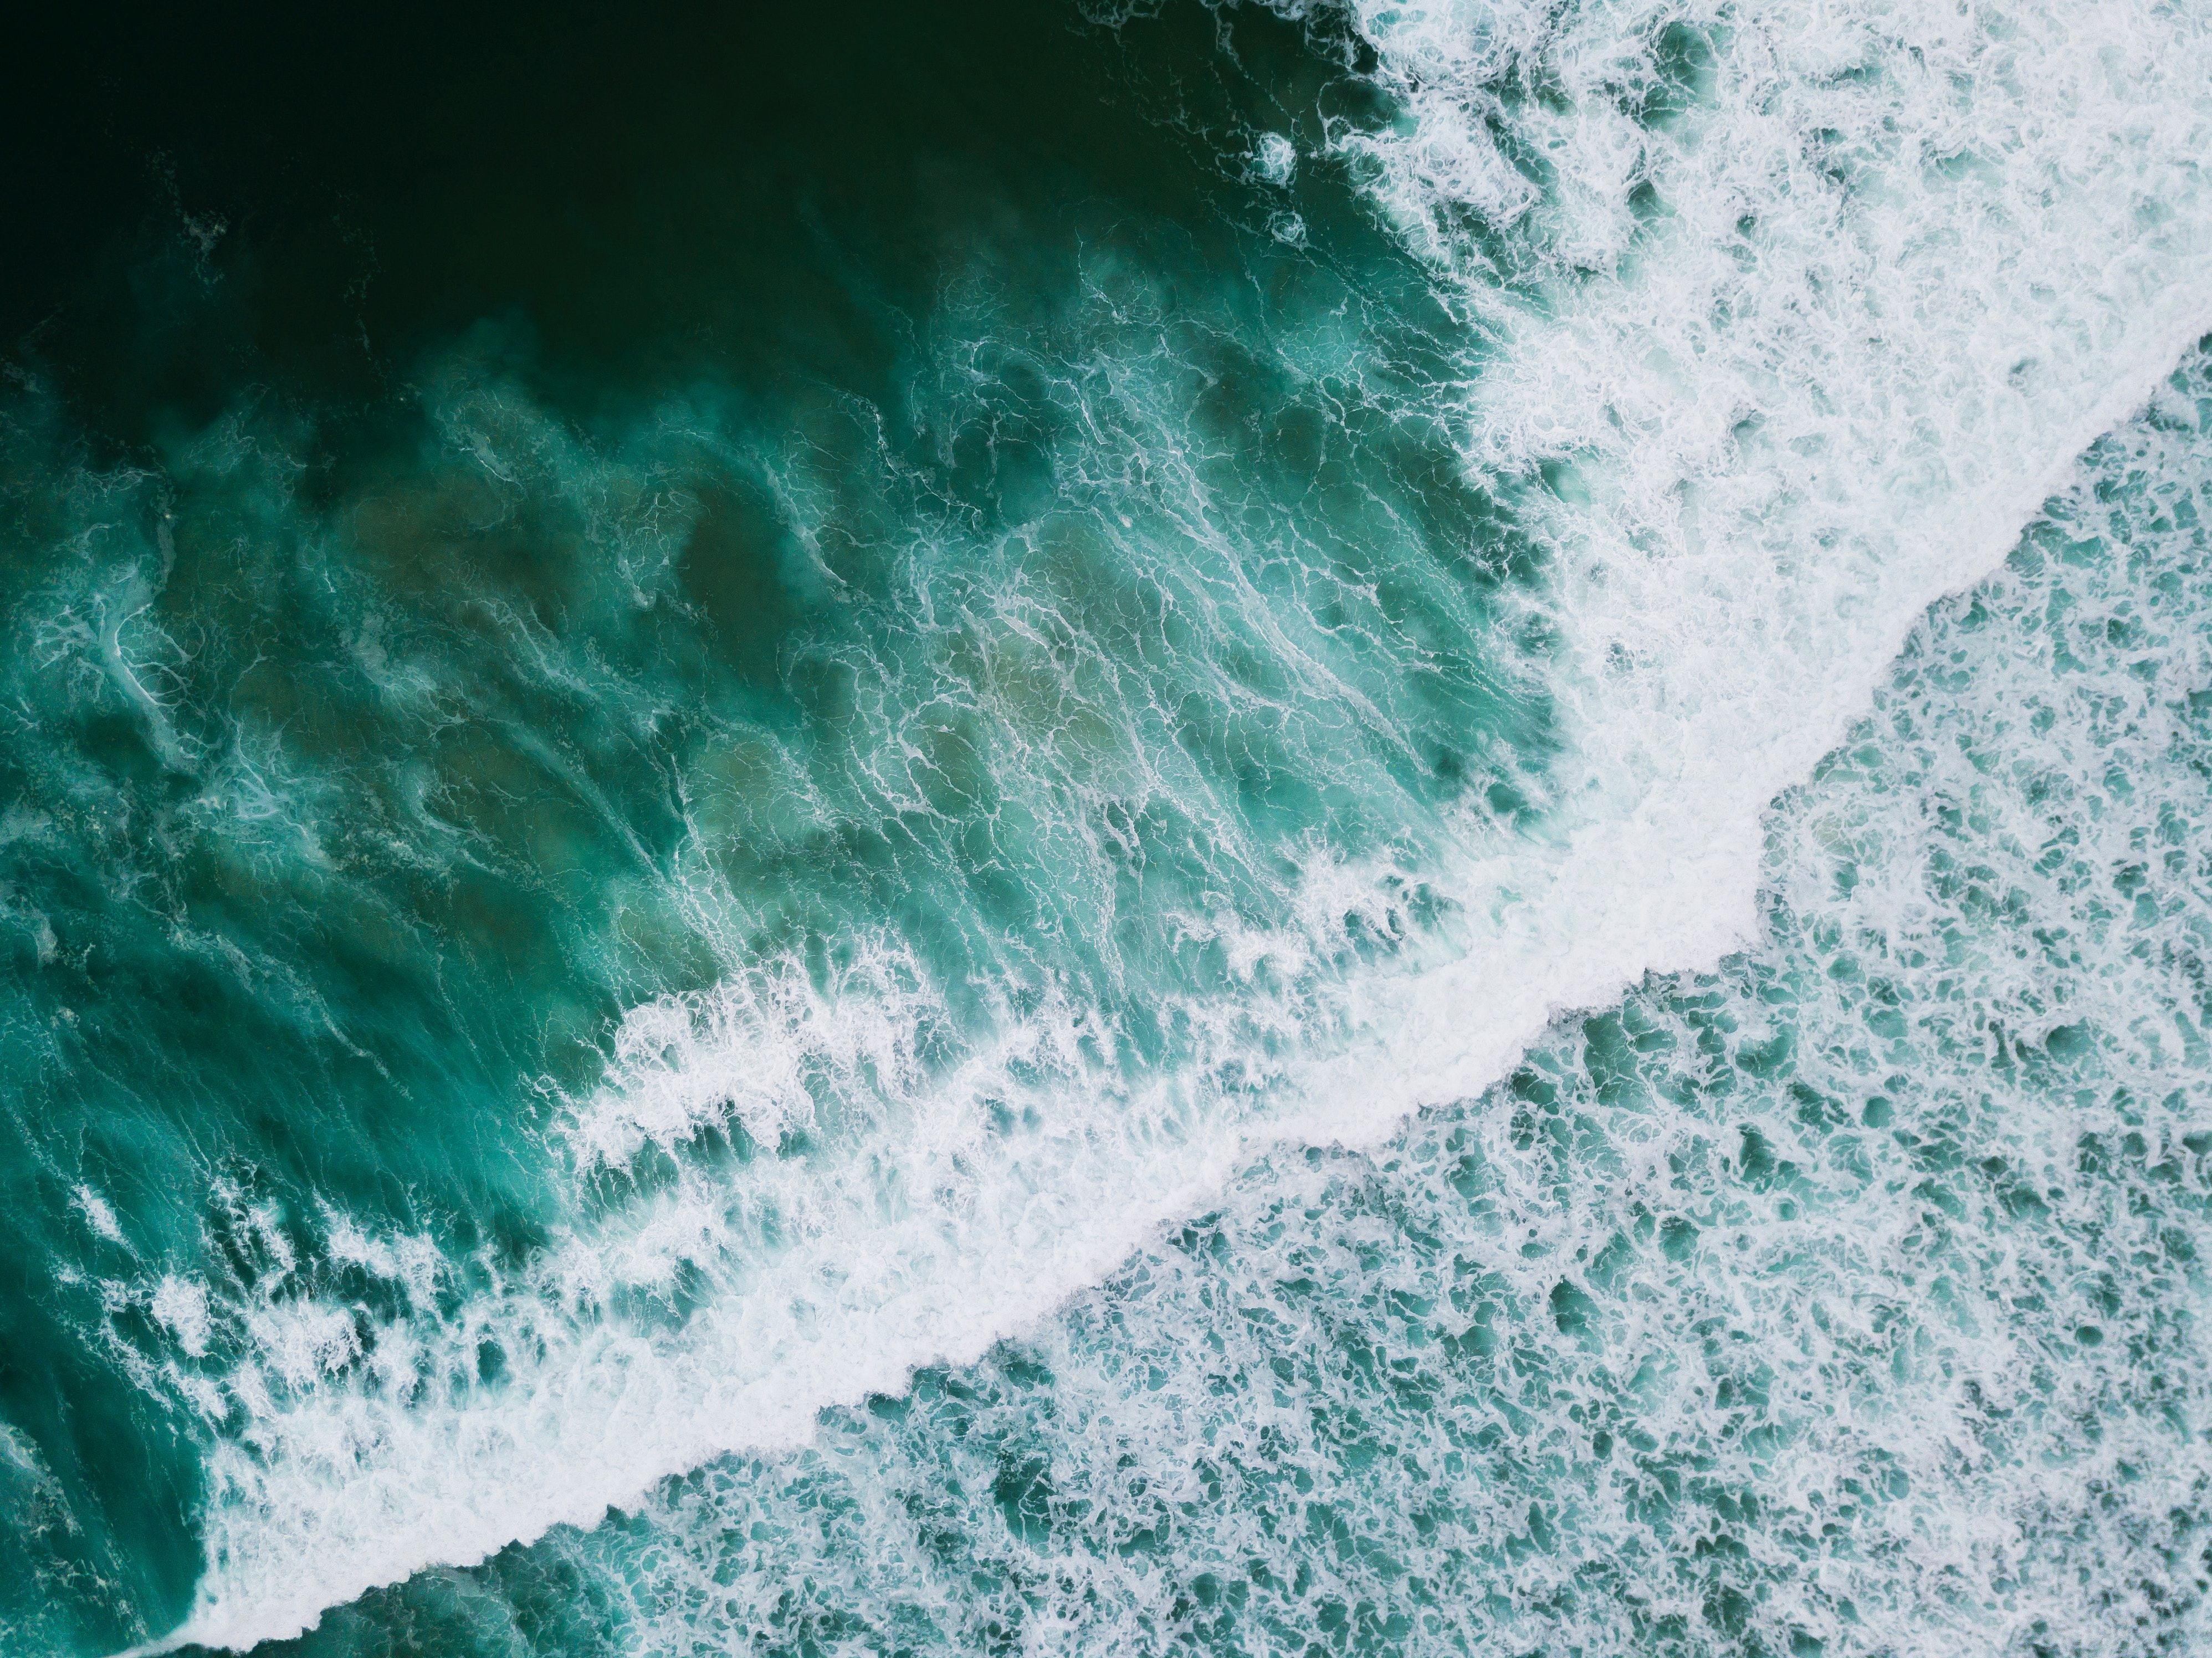 3992x2992 #ocean, #wave, #wafe, #drone, #waveing, #background, #water, #green water, #beach, #aerial, #wallpaper, #landscape, #sea, #nature, #Creative Commons image, #water green HD Wallpaper